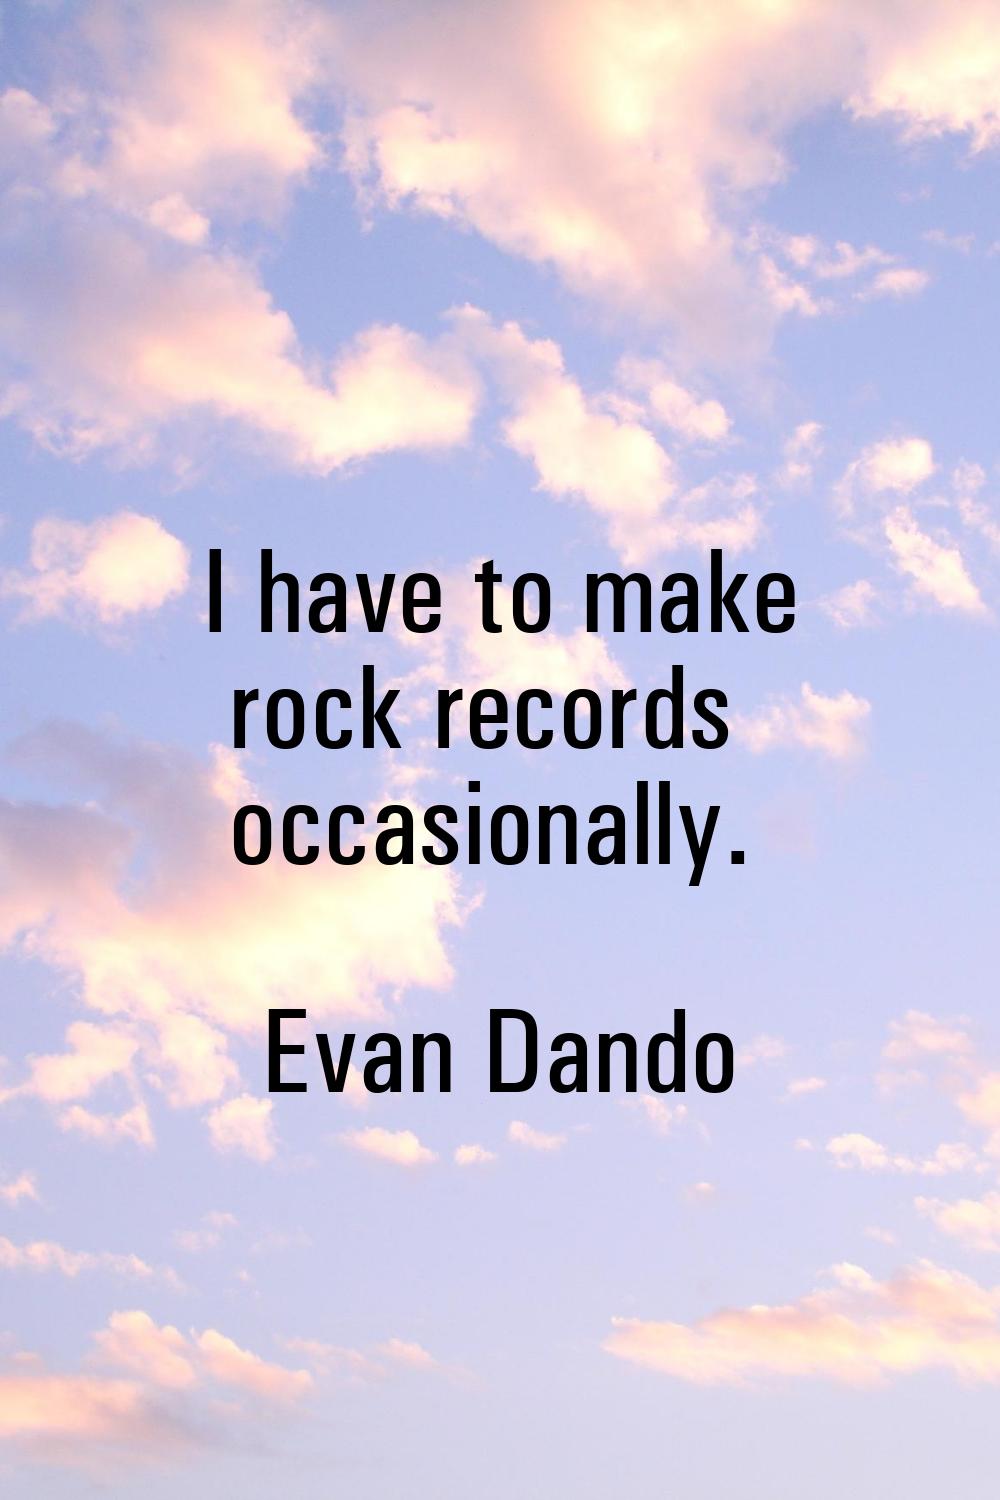 I have to make rock records occasionally.